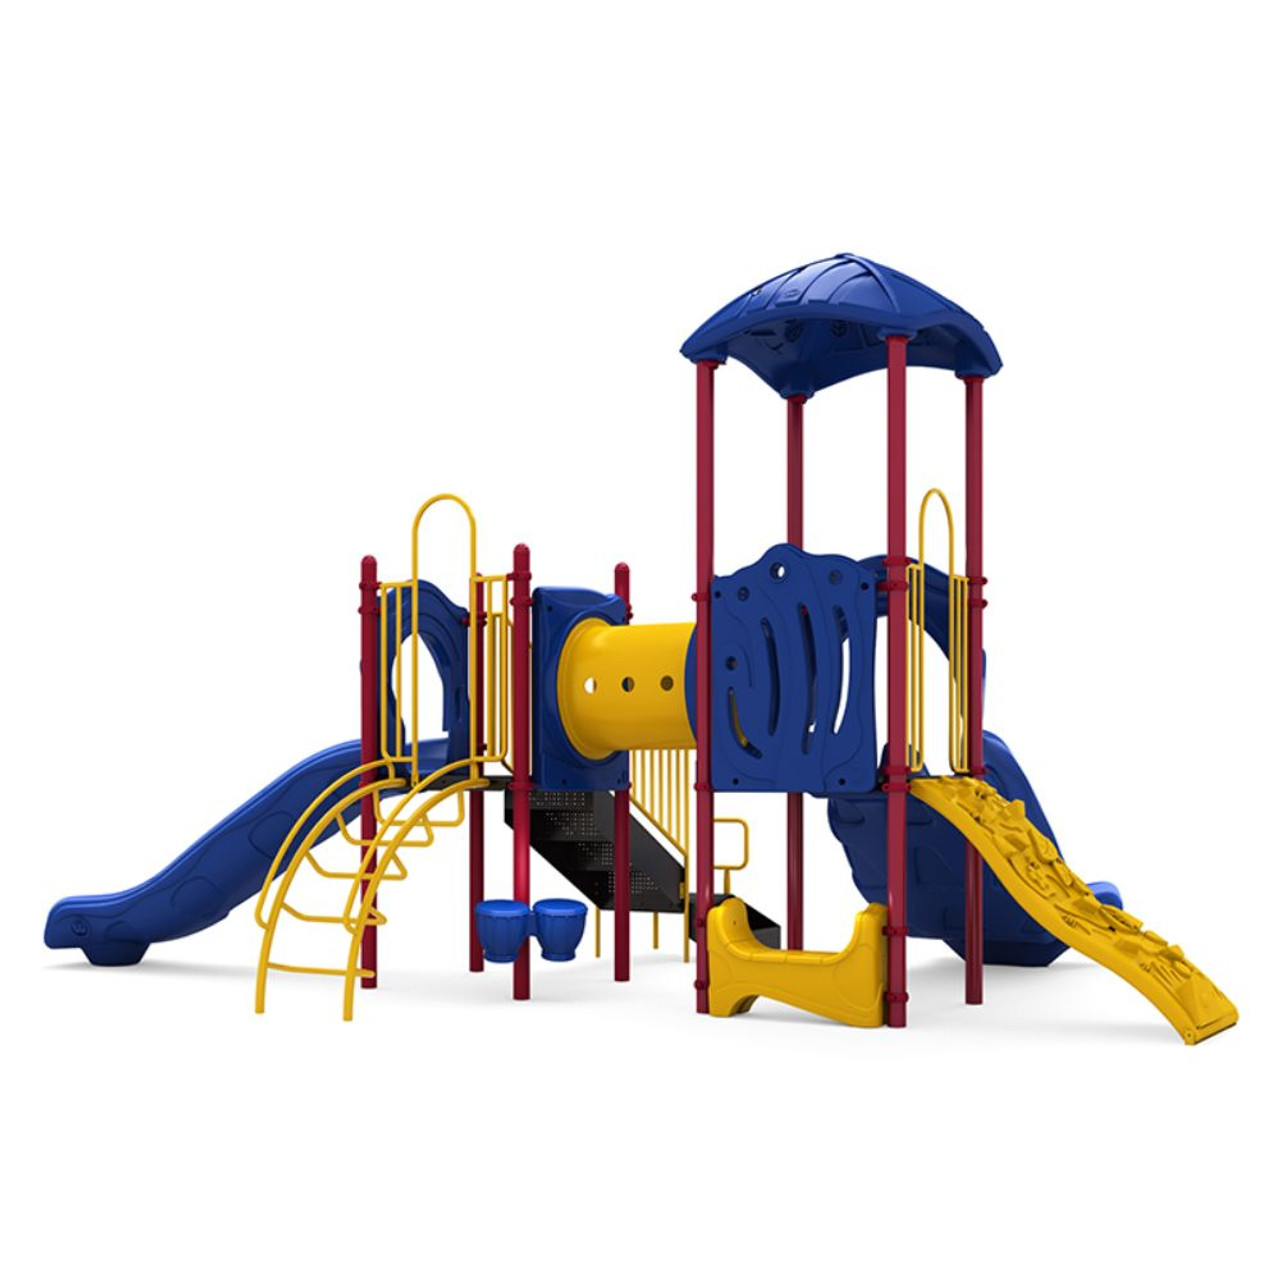 Shinin Bright Playset - primary - leaf roof